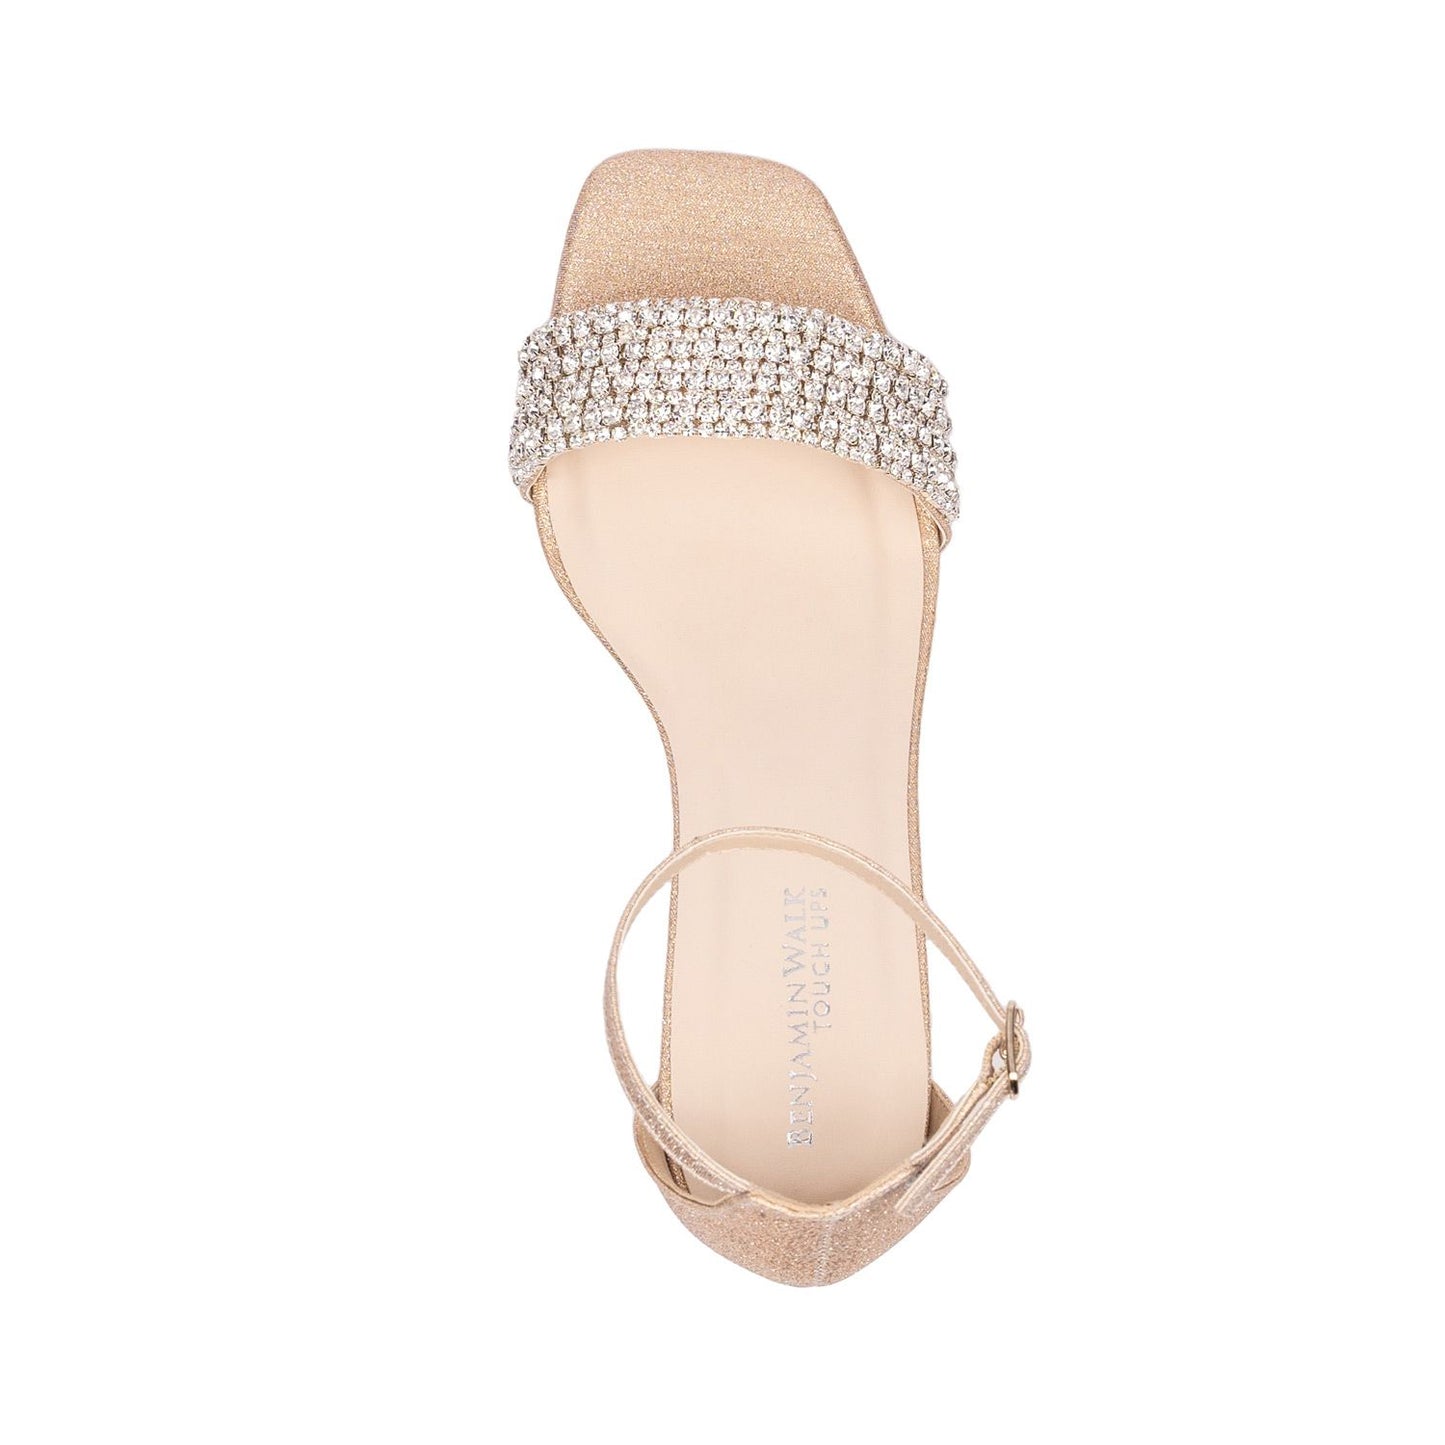 Overhead view of Champagne 2.25 inch heeled shoe with rhinestone detail and ankle strap